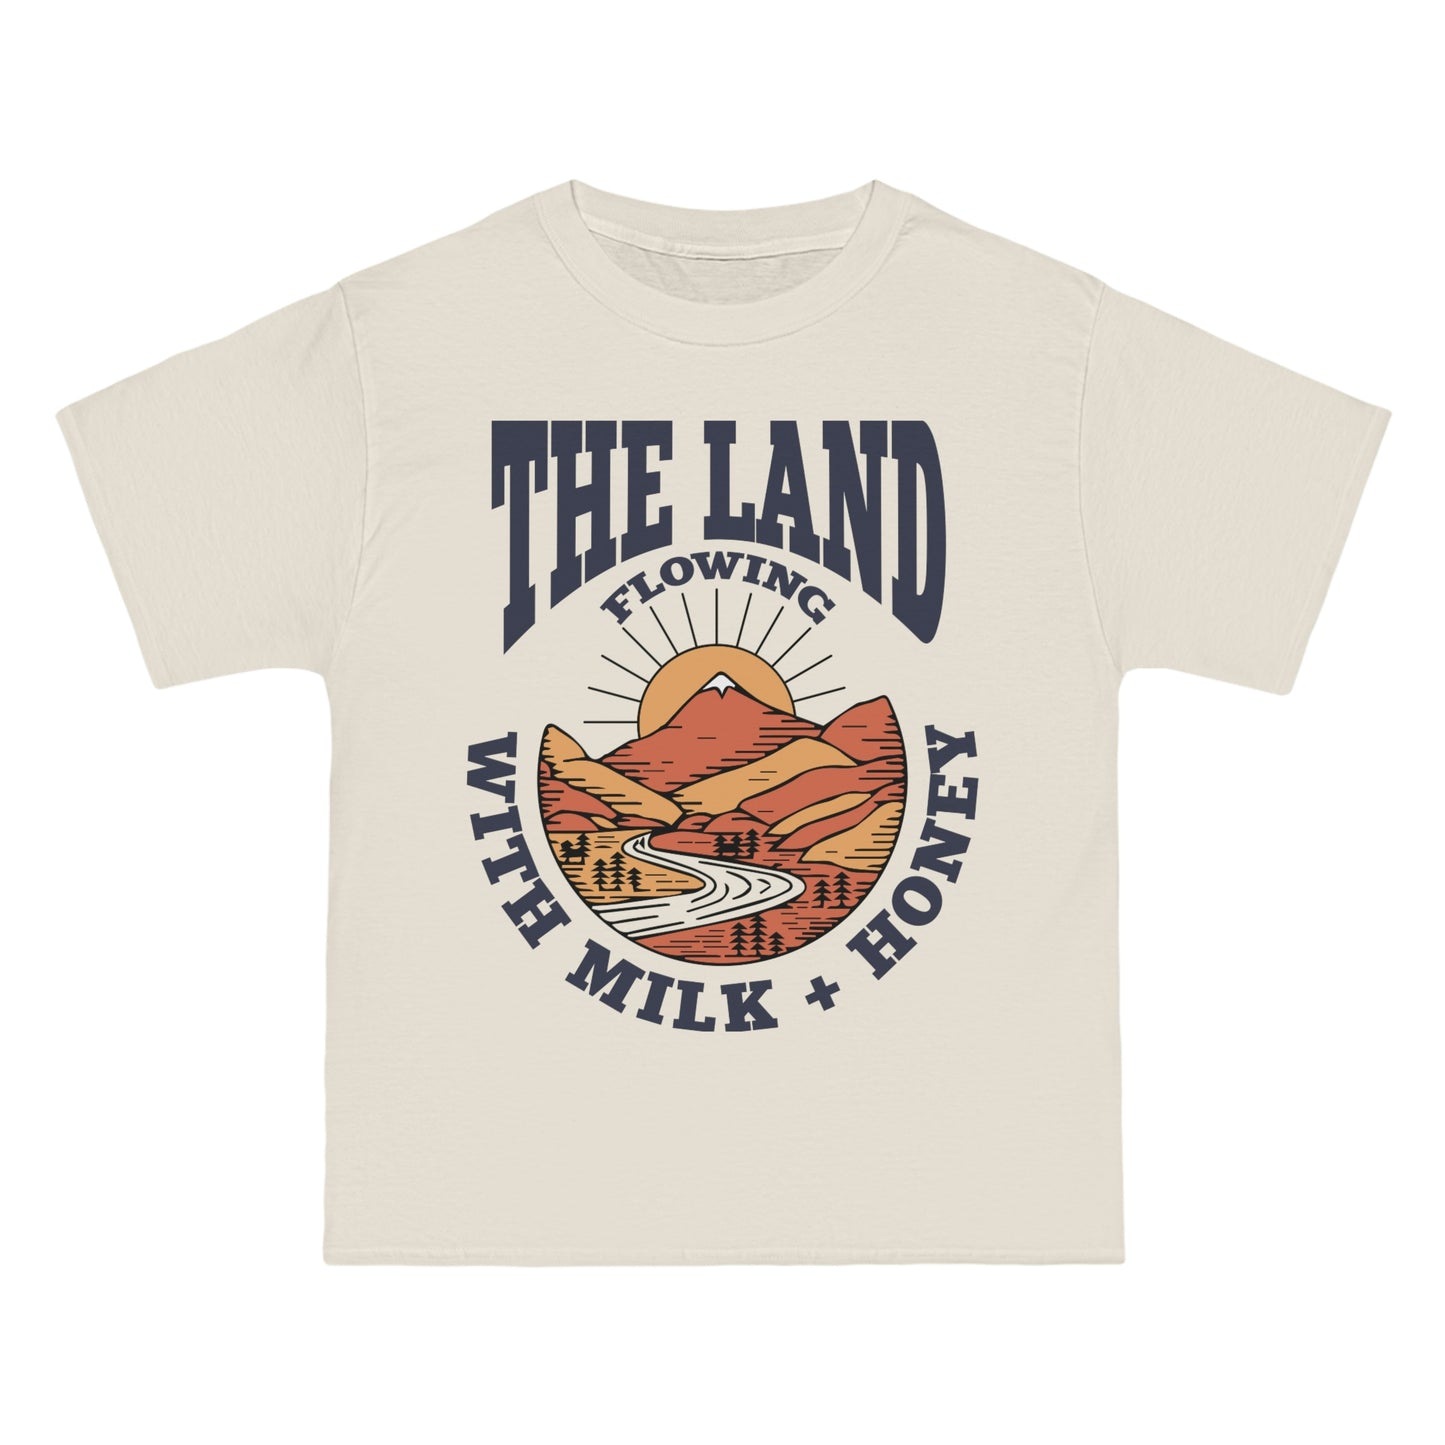 The Land Flowing with Milk & Honey - Natural Oversized Tee